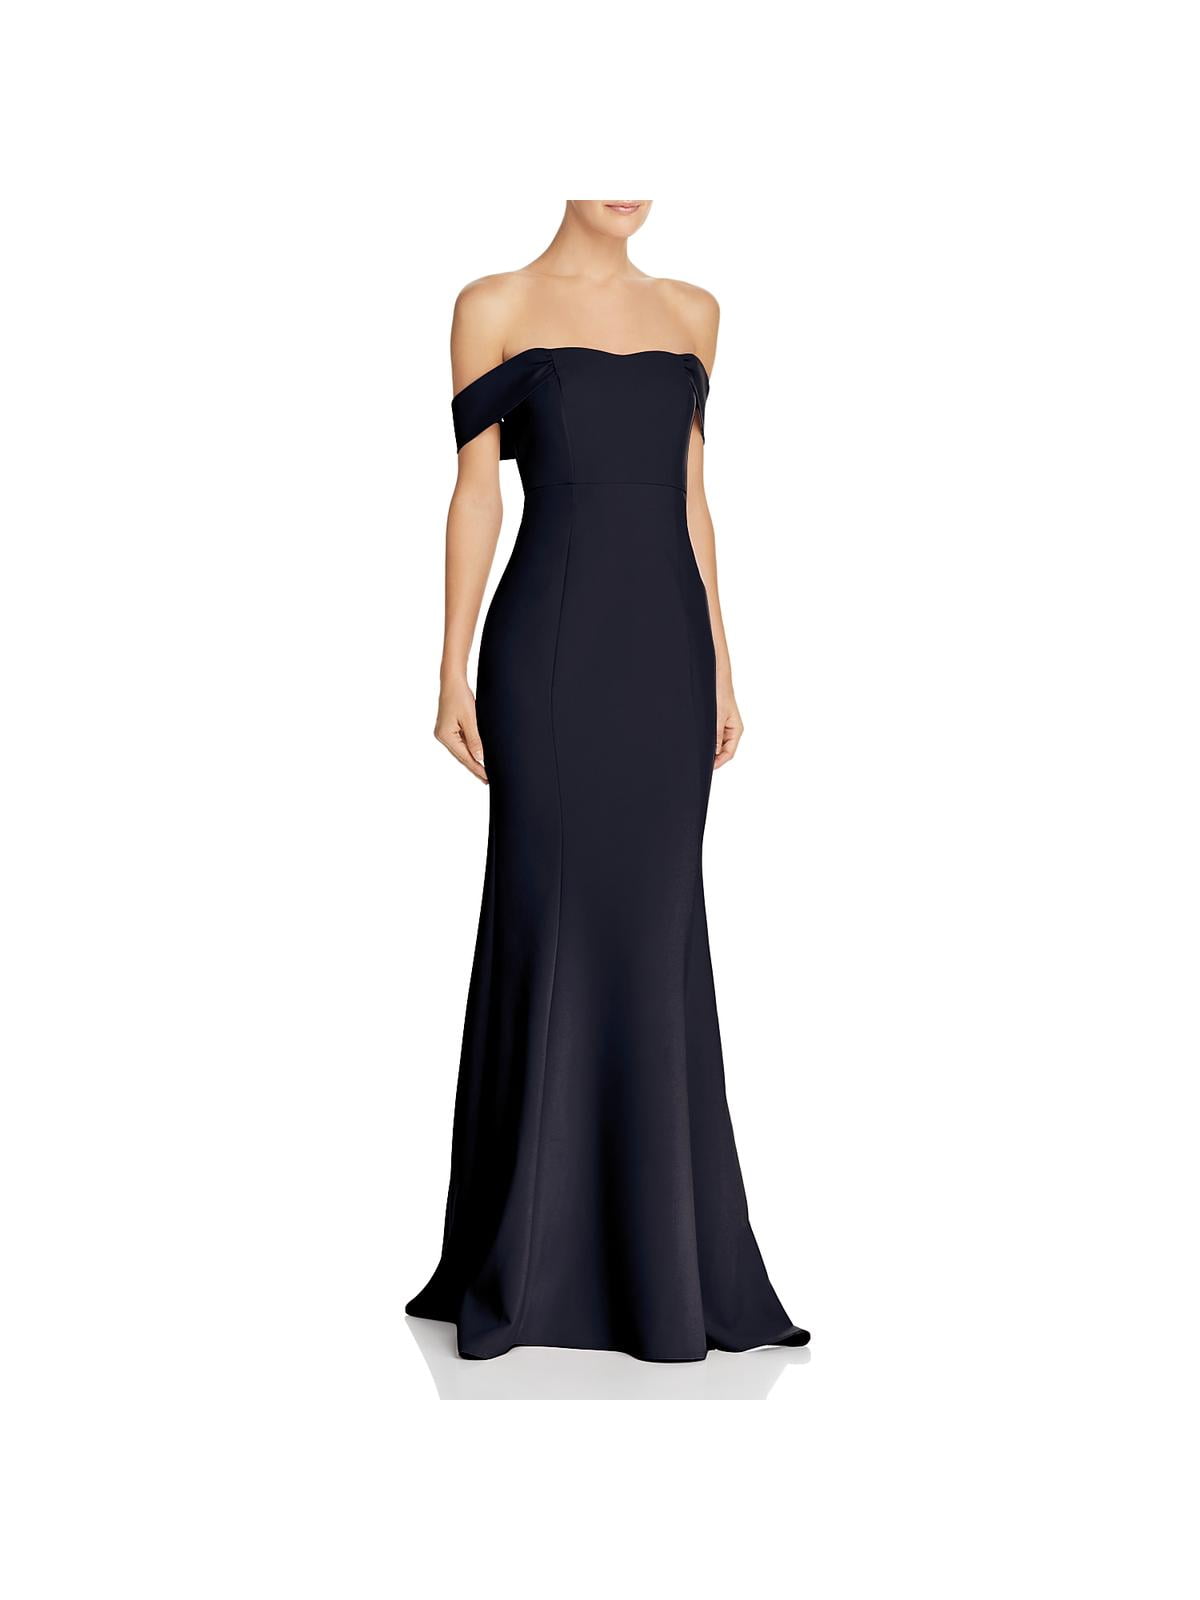 FACE N FACE Womens Long Scoop Neck Strapless Mermaid Evening Dress